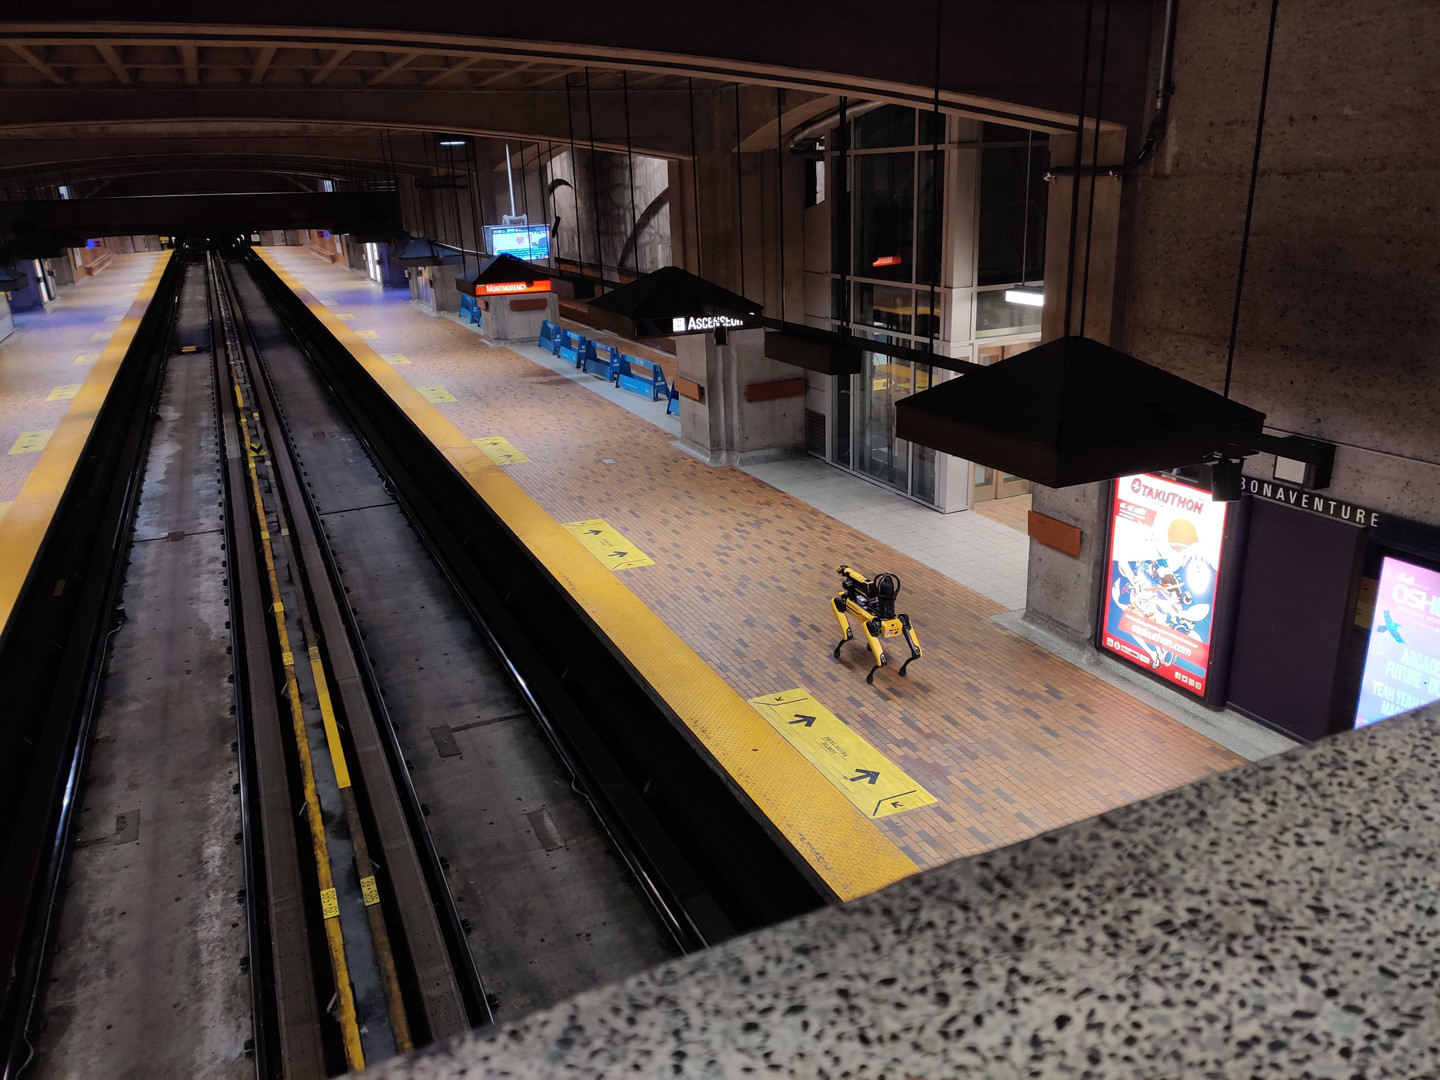 To truly put the robot dog to the test, the STM deliberately left some debris lying around and sketched a few fake tags on the station walls.